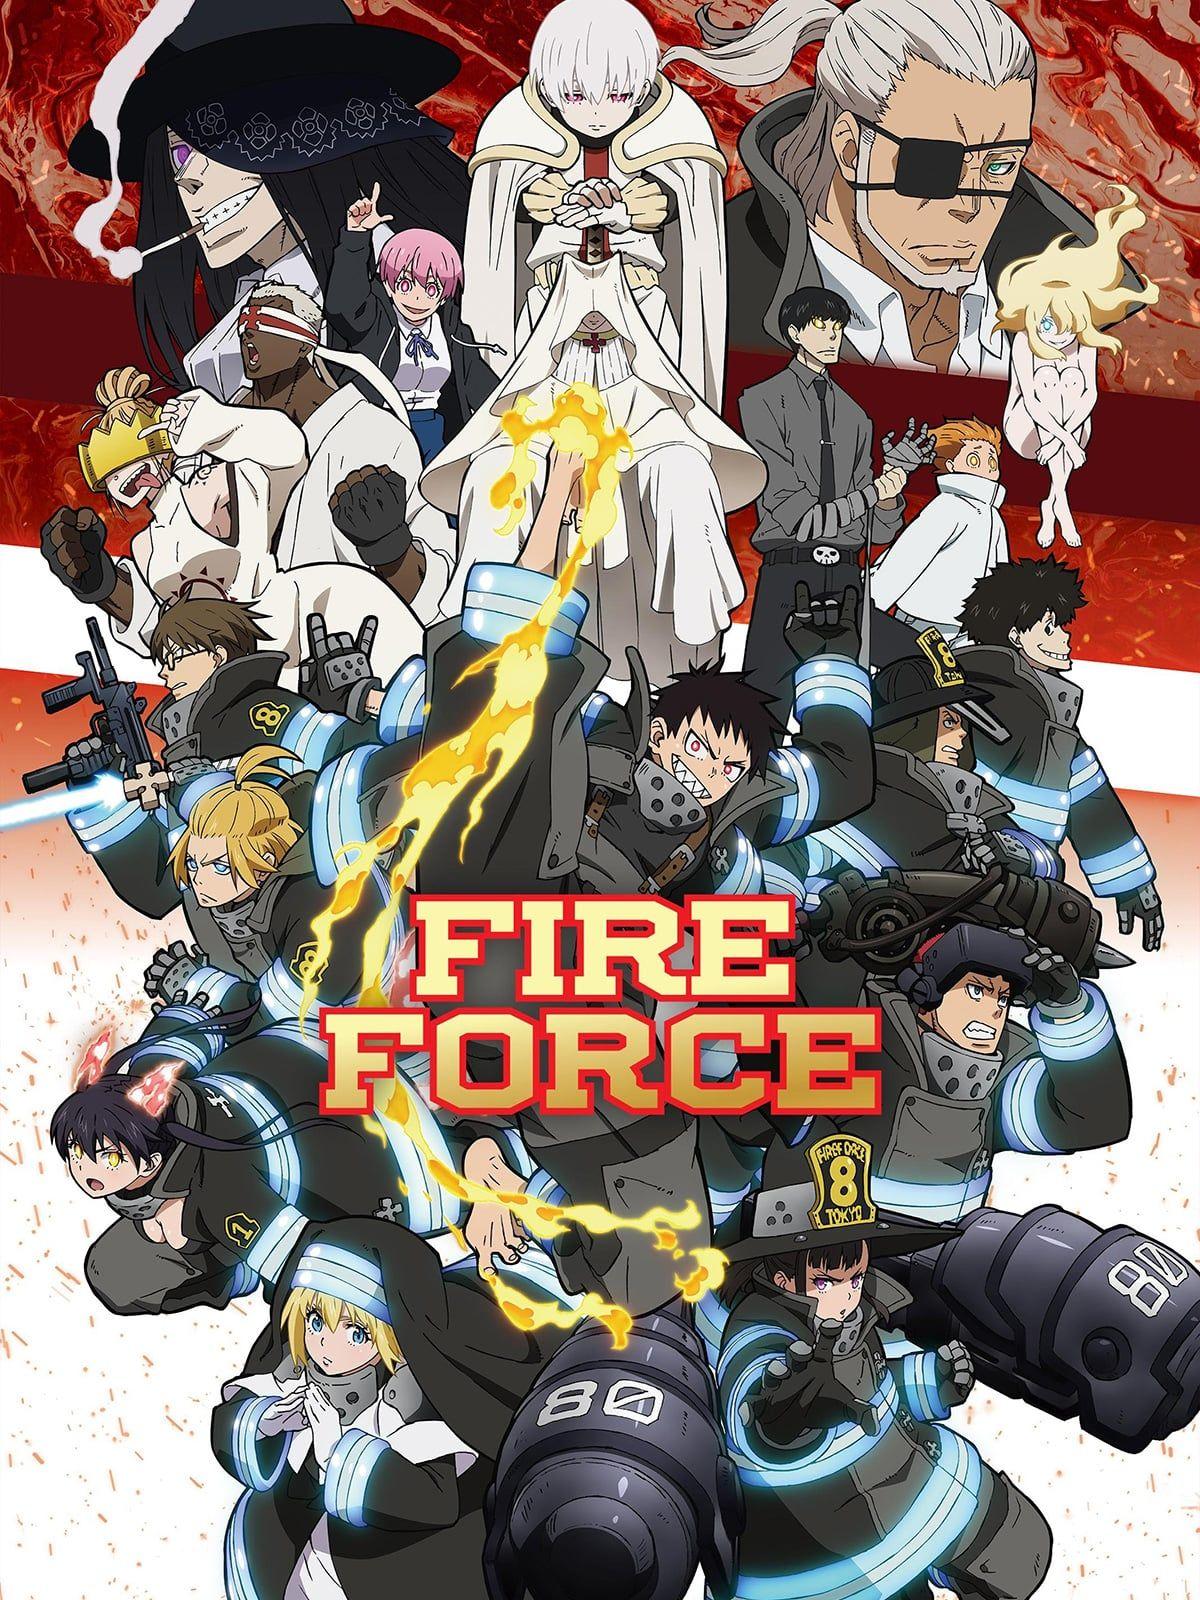 Download Fire Force manga wallpaper by 404A10  ba  Free on ZEDGE now  Browse millions   Anime character drawing Cool anime wallpapers Anime  artwork wallpaper